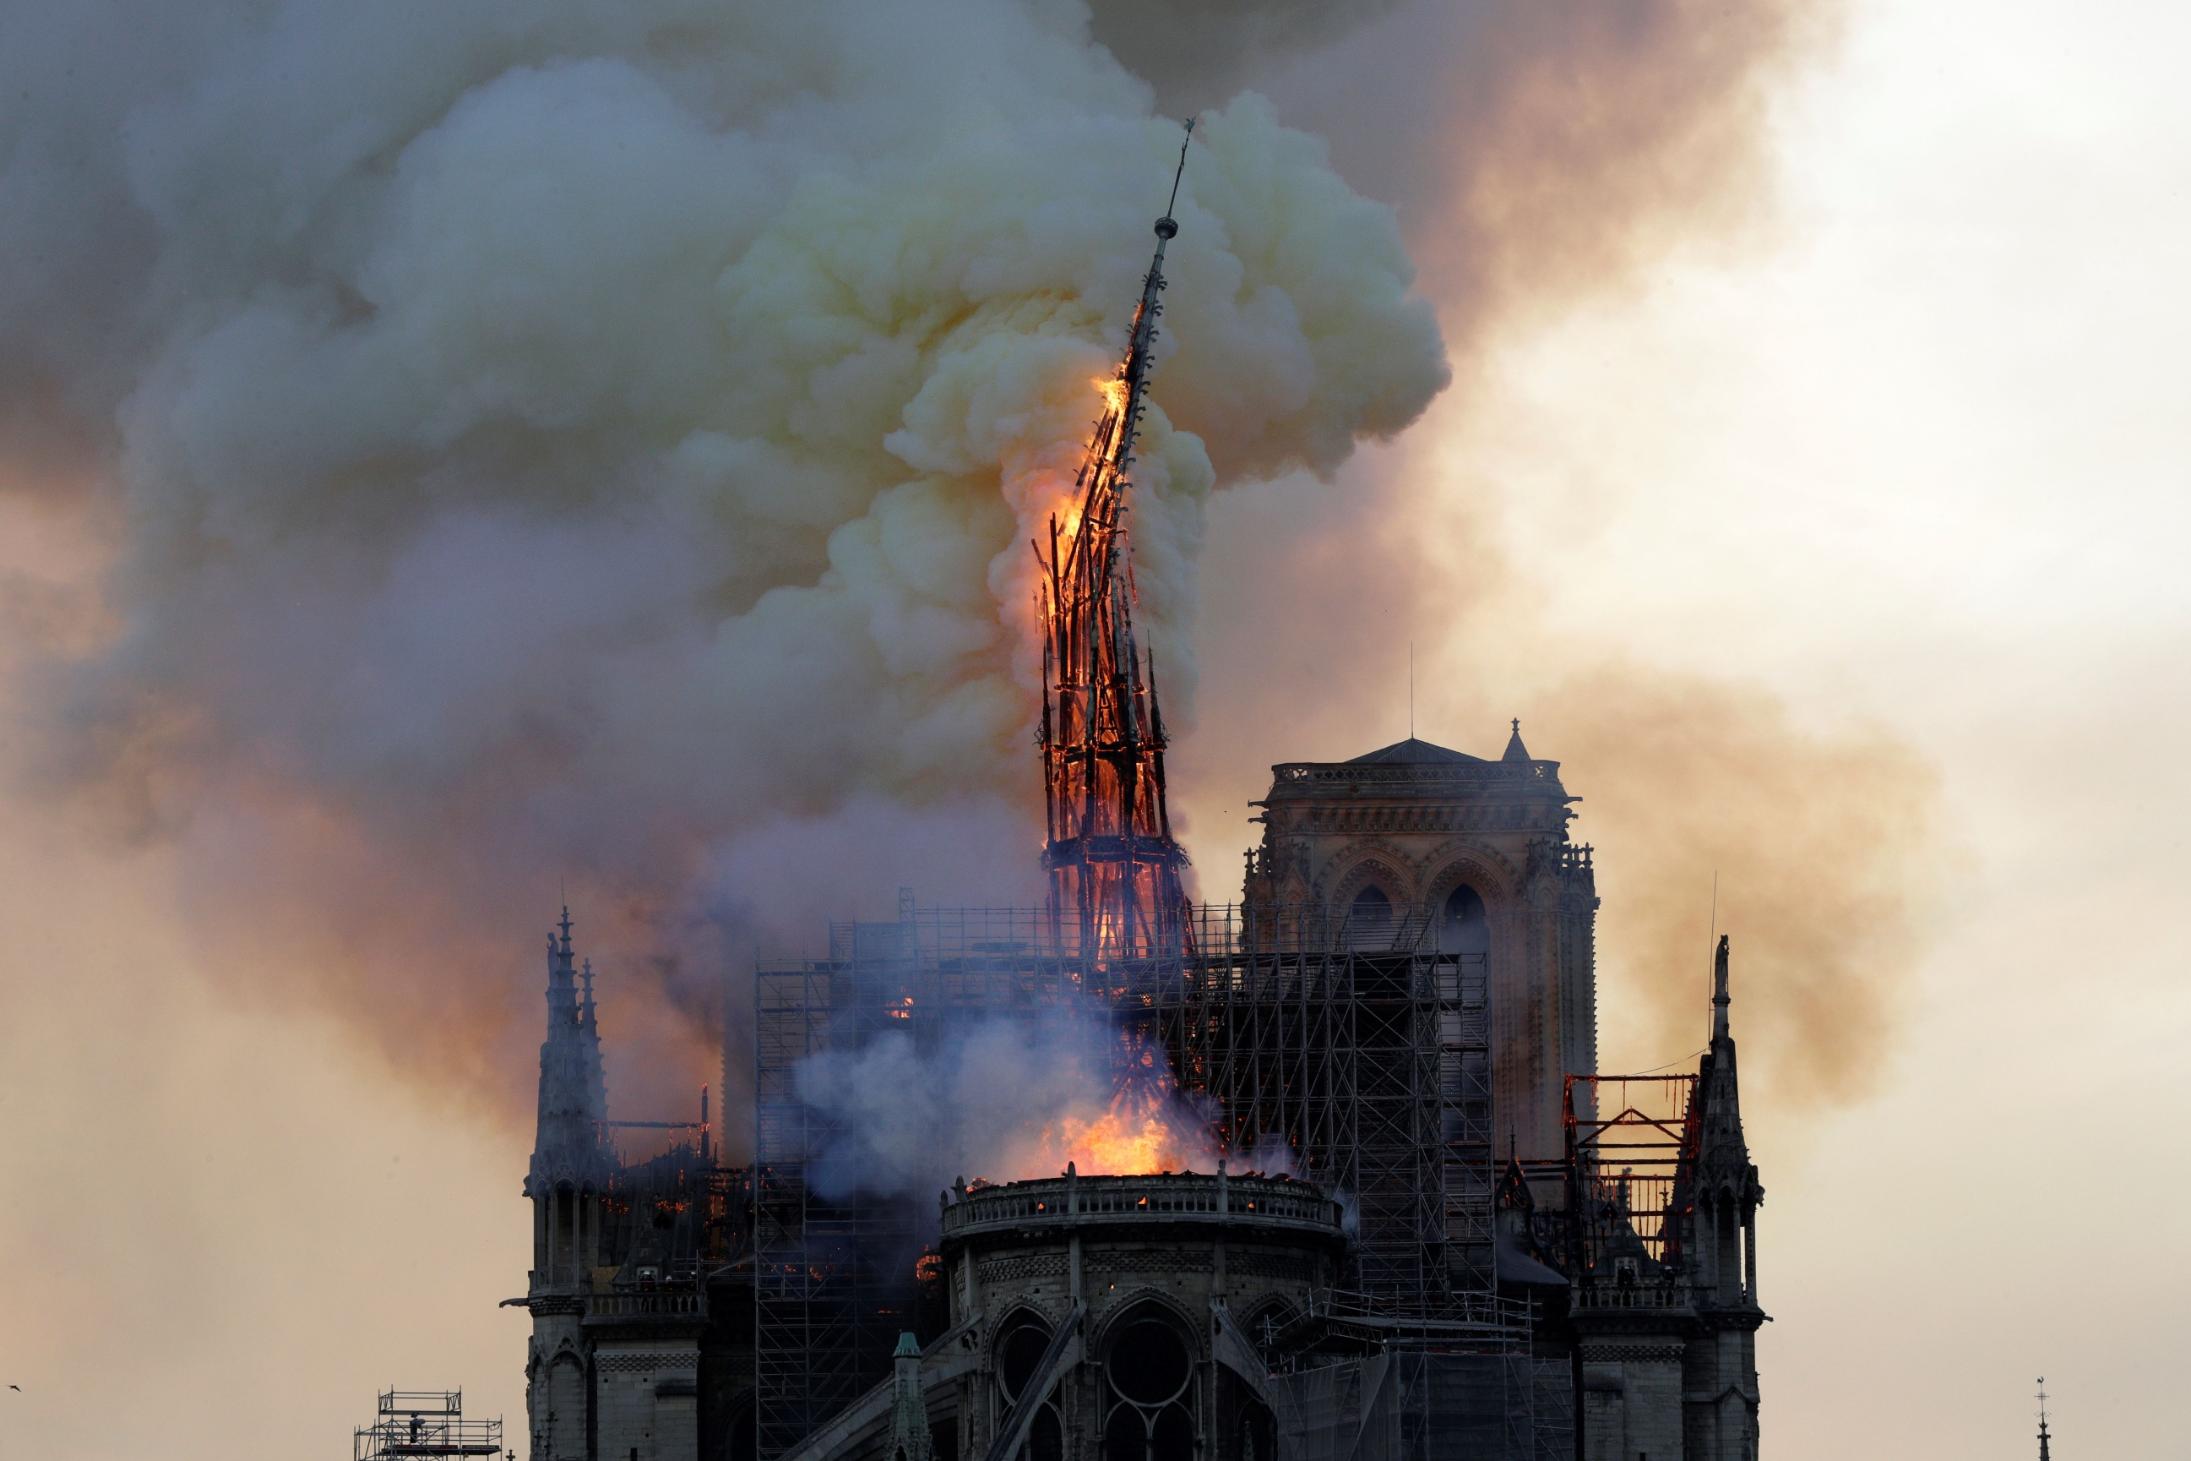 Scenes from the Notre Dame Cathedral fire - CNN Video